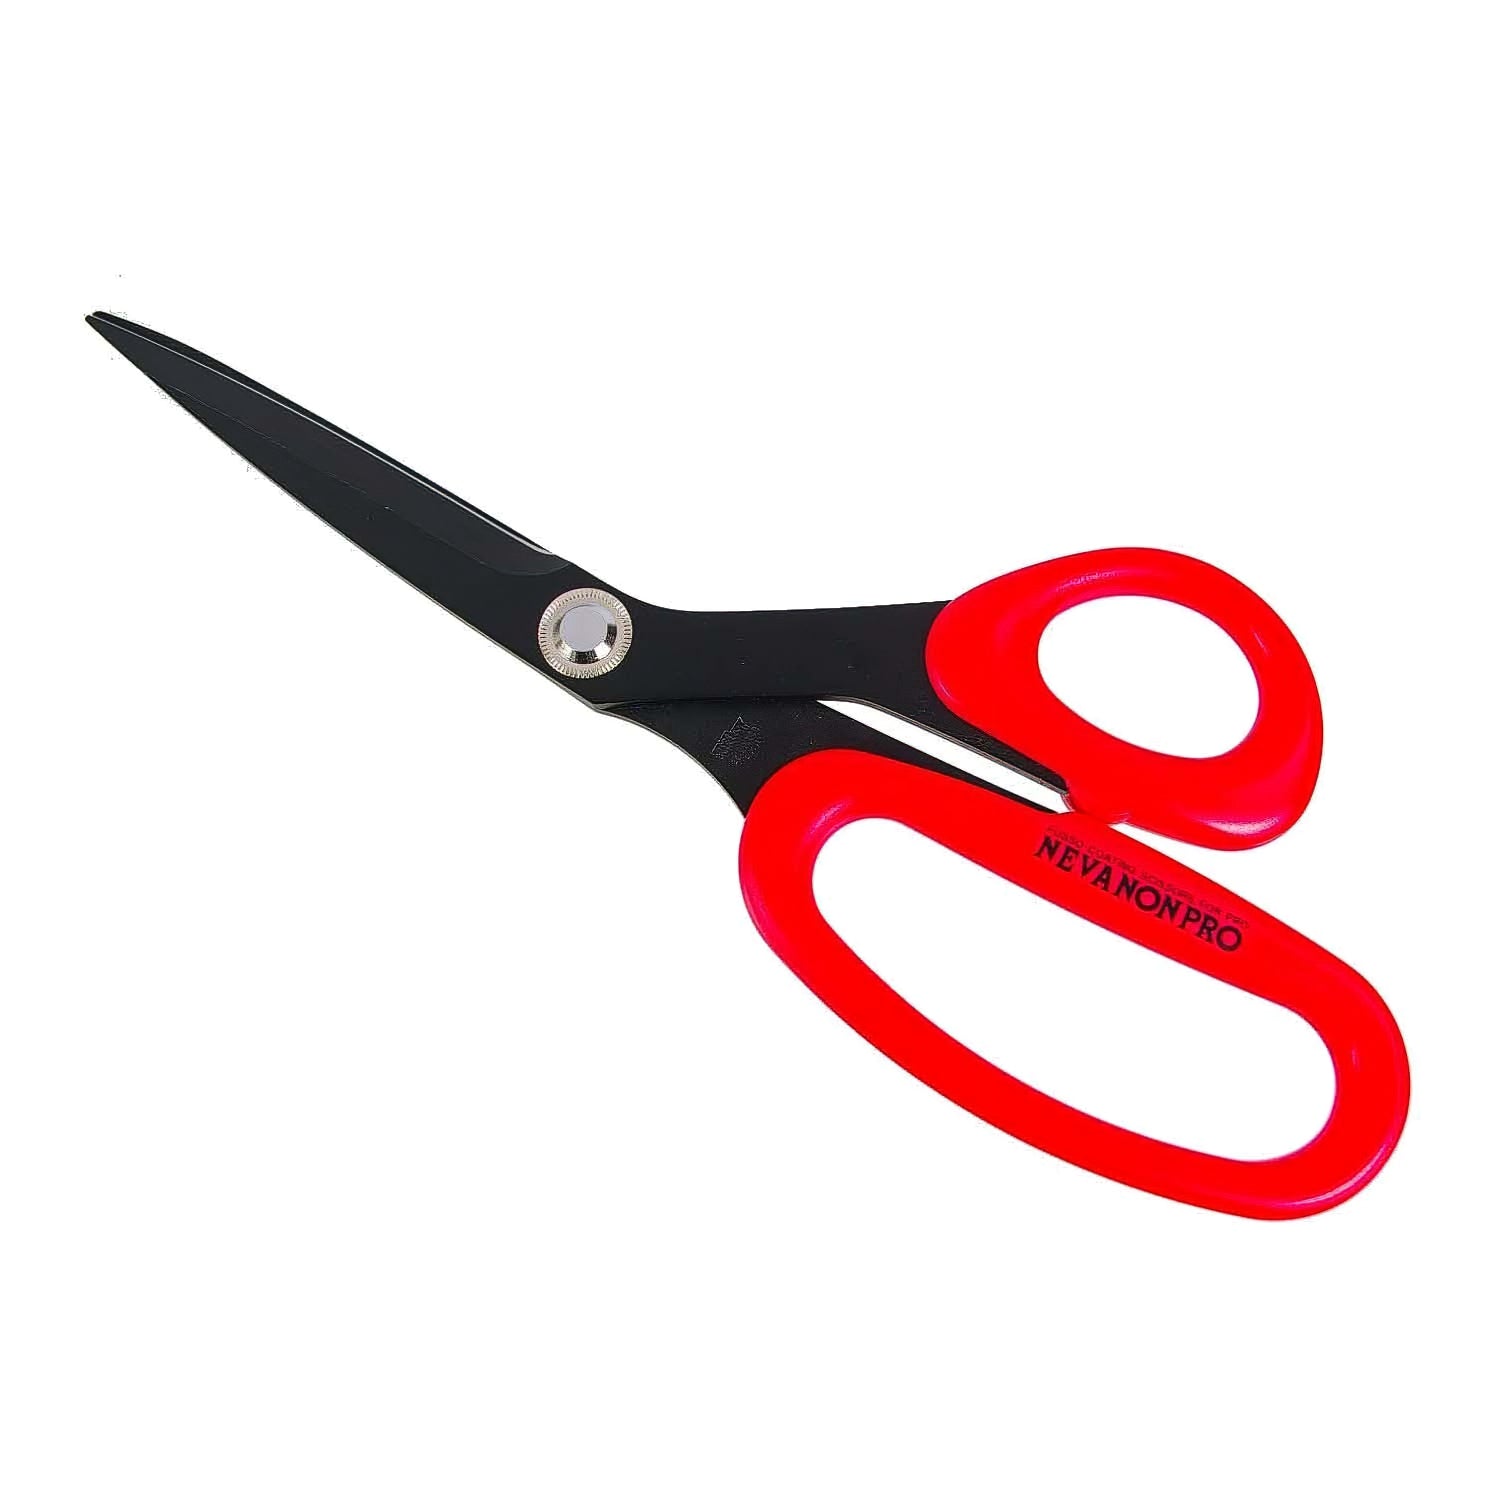 ODMILY Left Handed Kitchen Scissors for General Use Woman Kitchen Accessories Shears Heavy Duty Cooking Shears Left Handed Black Scissors Adults